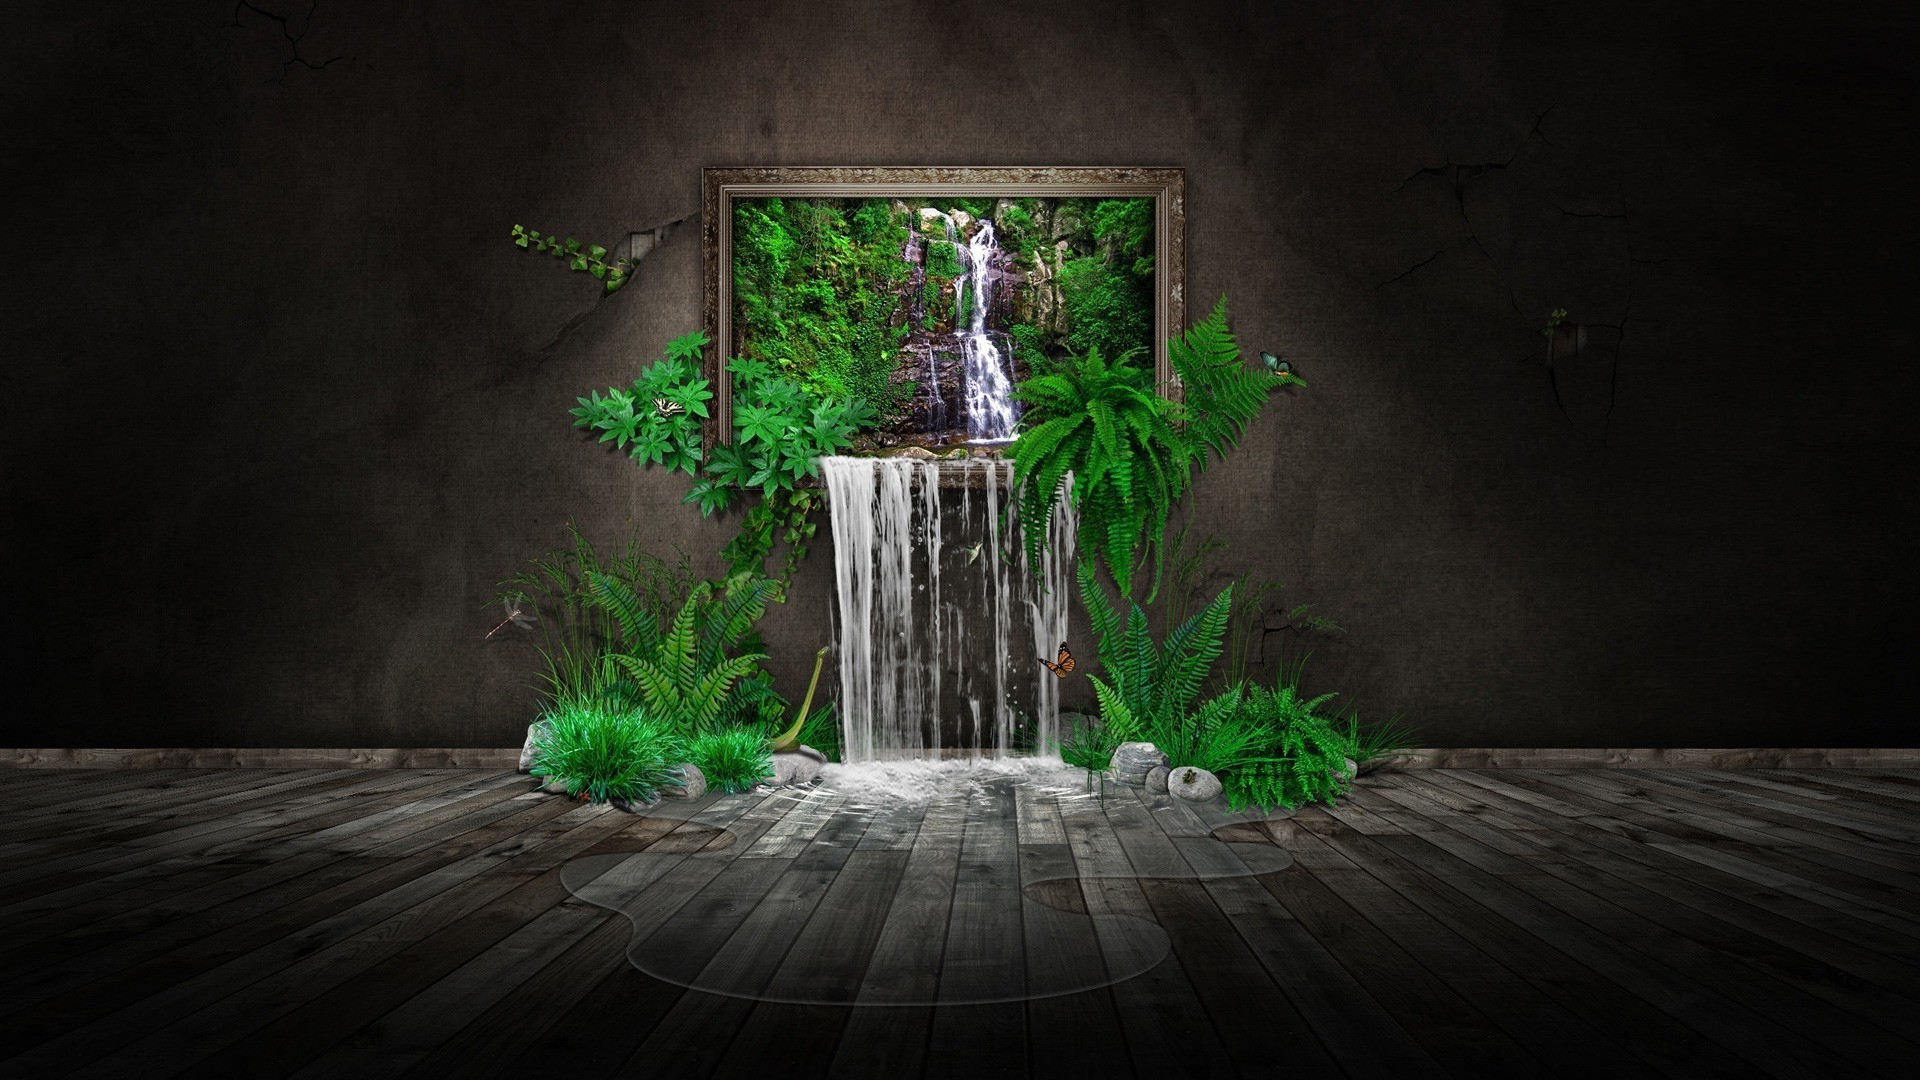 digital Art, CGI, Minimalism, Water, Nature, Ferns, Leaves, Trees, Waterfall, Picture Frames, Rock, Stones, Butterfly, Walls, Wooden Surface, Puddle Wallpaper